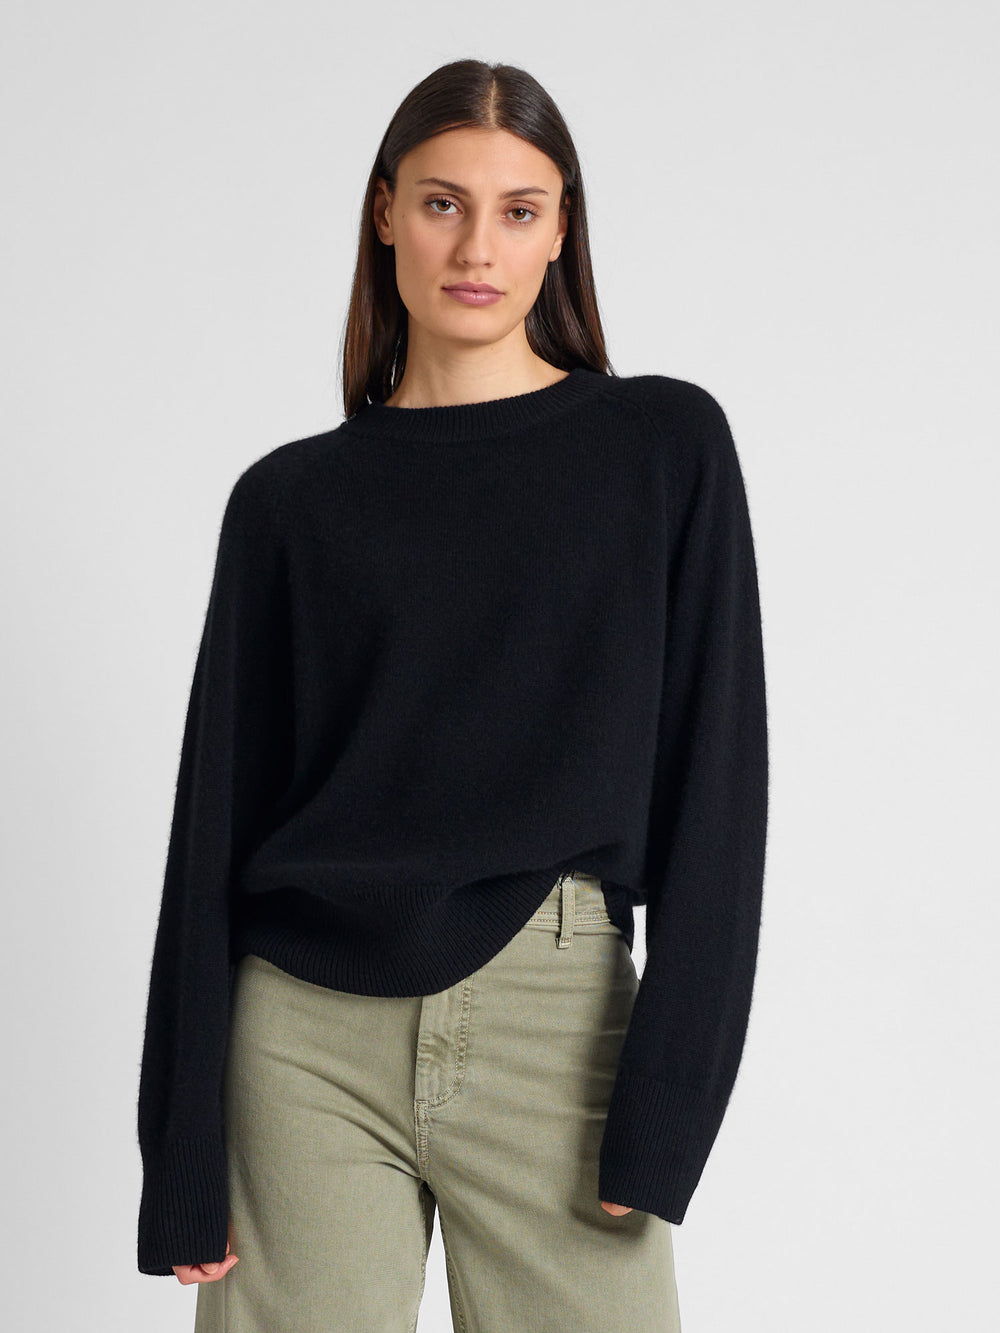 Chunky cashmere sweater "Signy" in 100% pure cashmere. Scandinavian design by Kashmina. Color: Black.